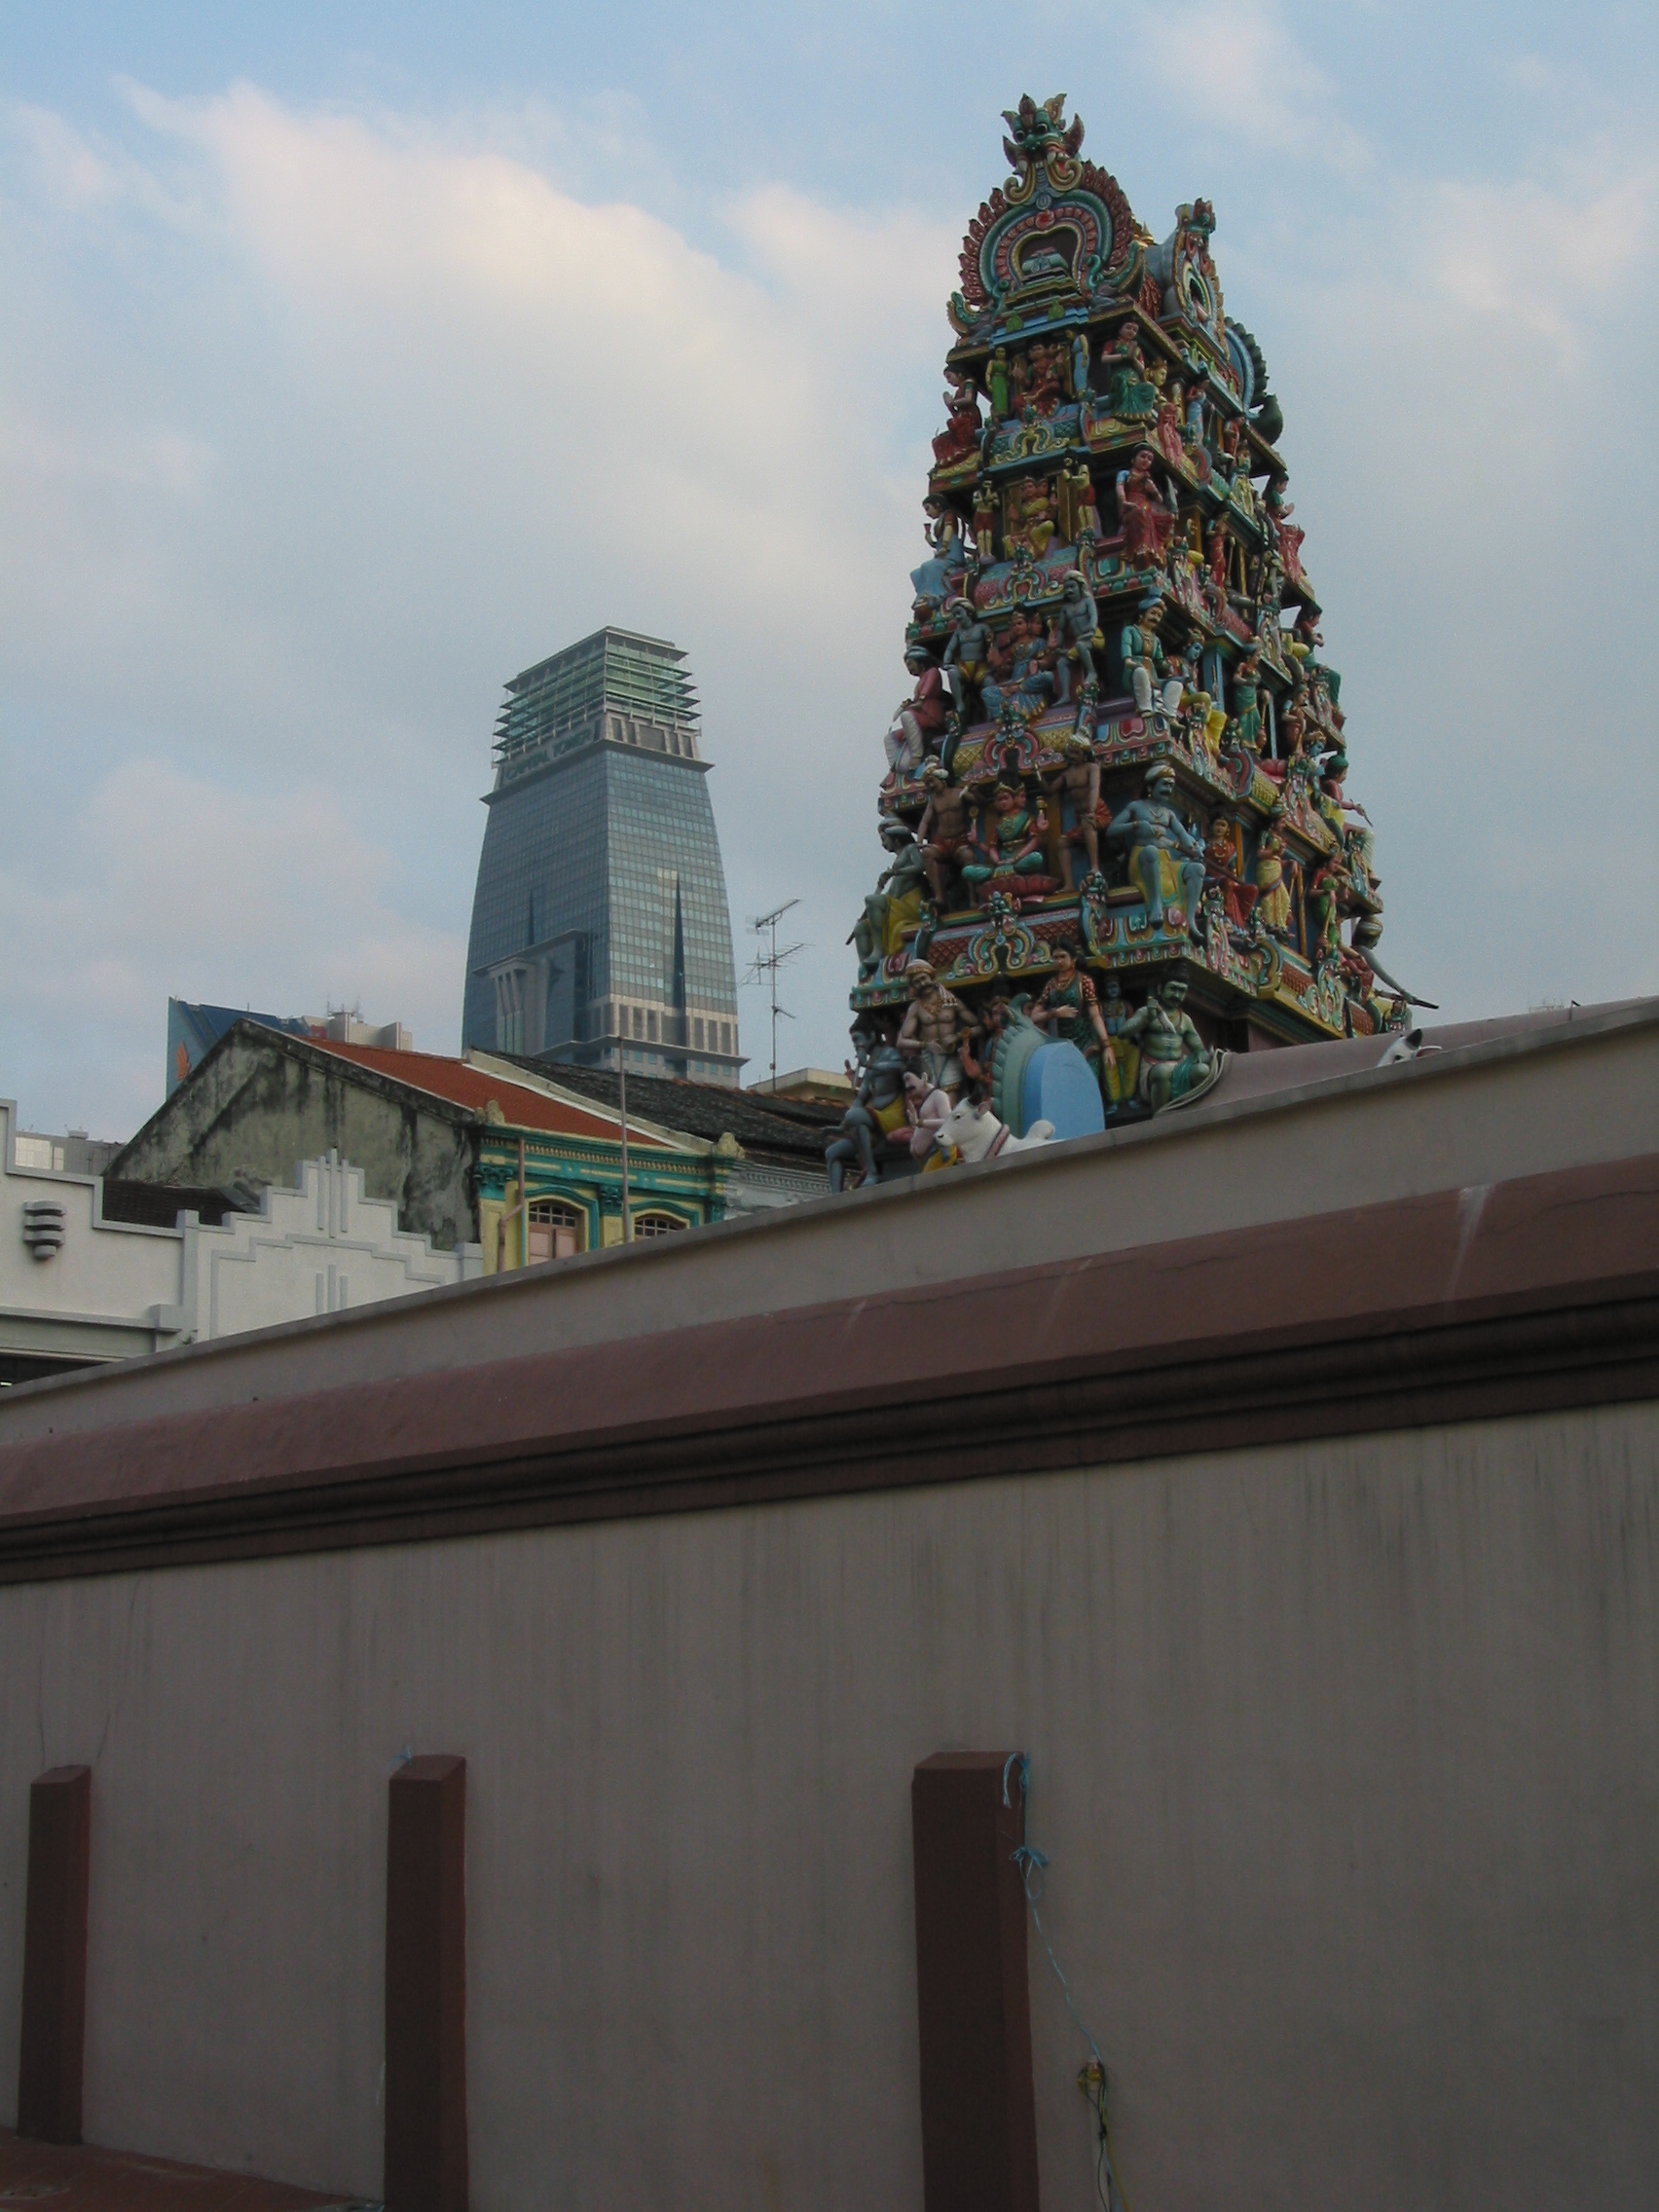 Hindu temple and downtown